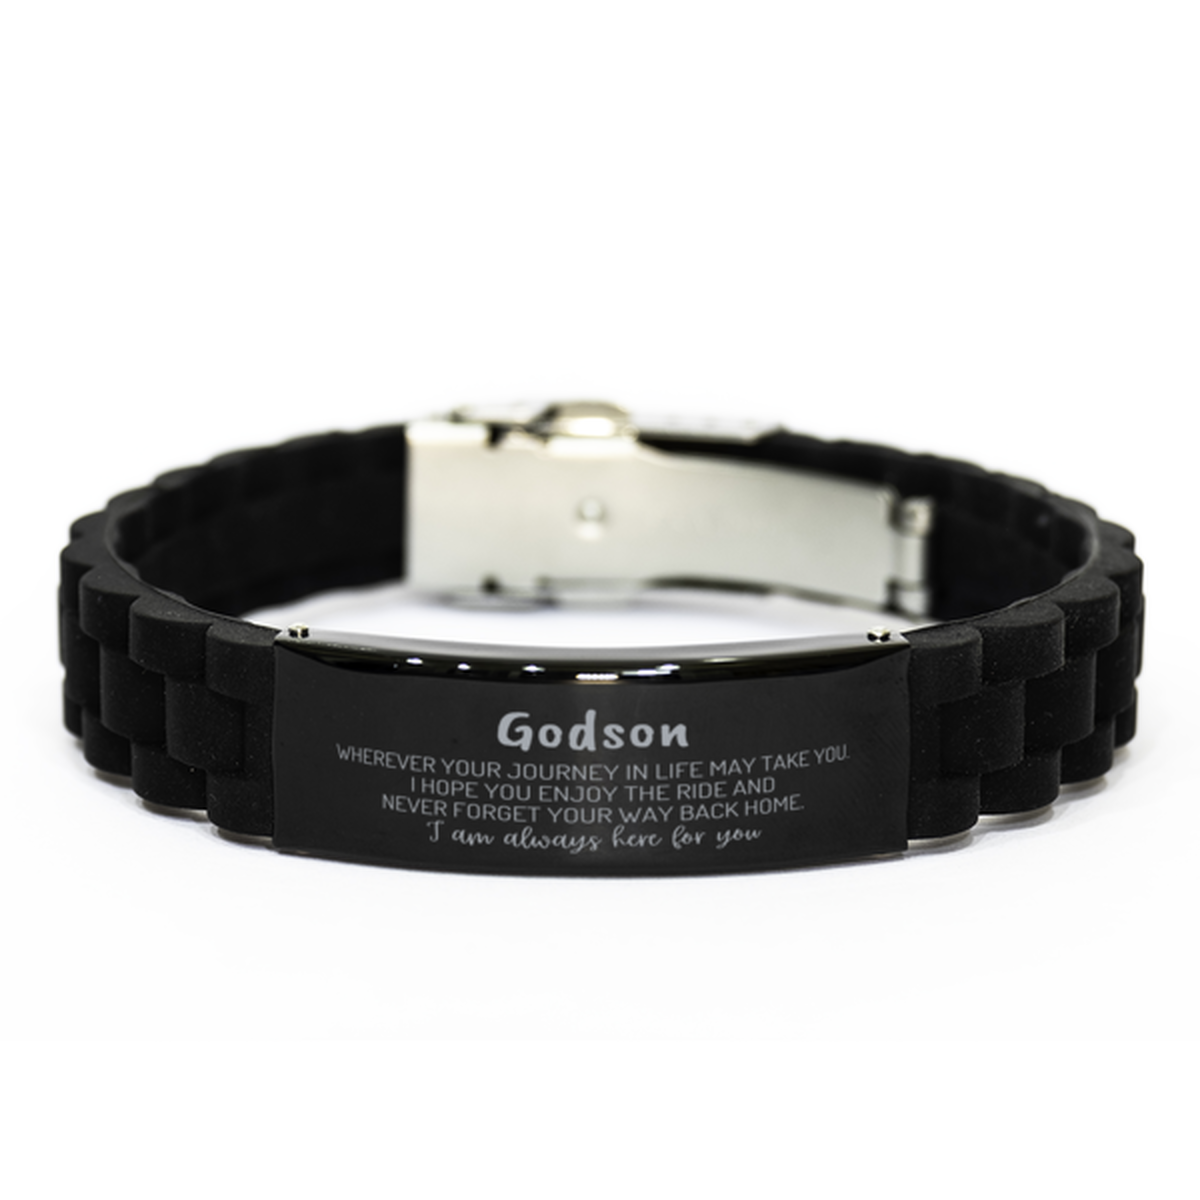 Godson wherever your journey in life may take you, I am always here for you Godson Black Glidelock Clasp Bracelet, Awesome Christmas Gifts For Godson, Godson Birthday Gifts for Men Women Family Loved One